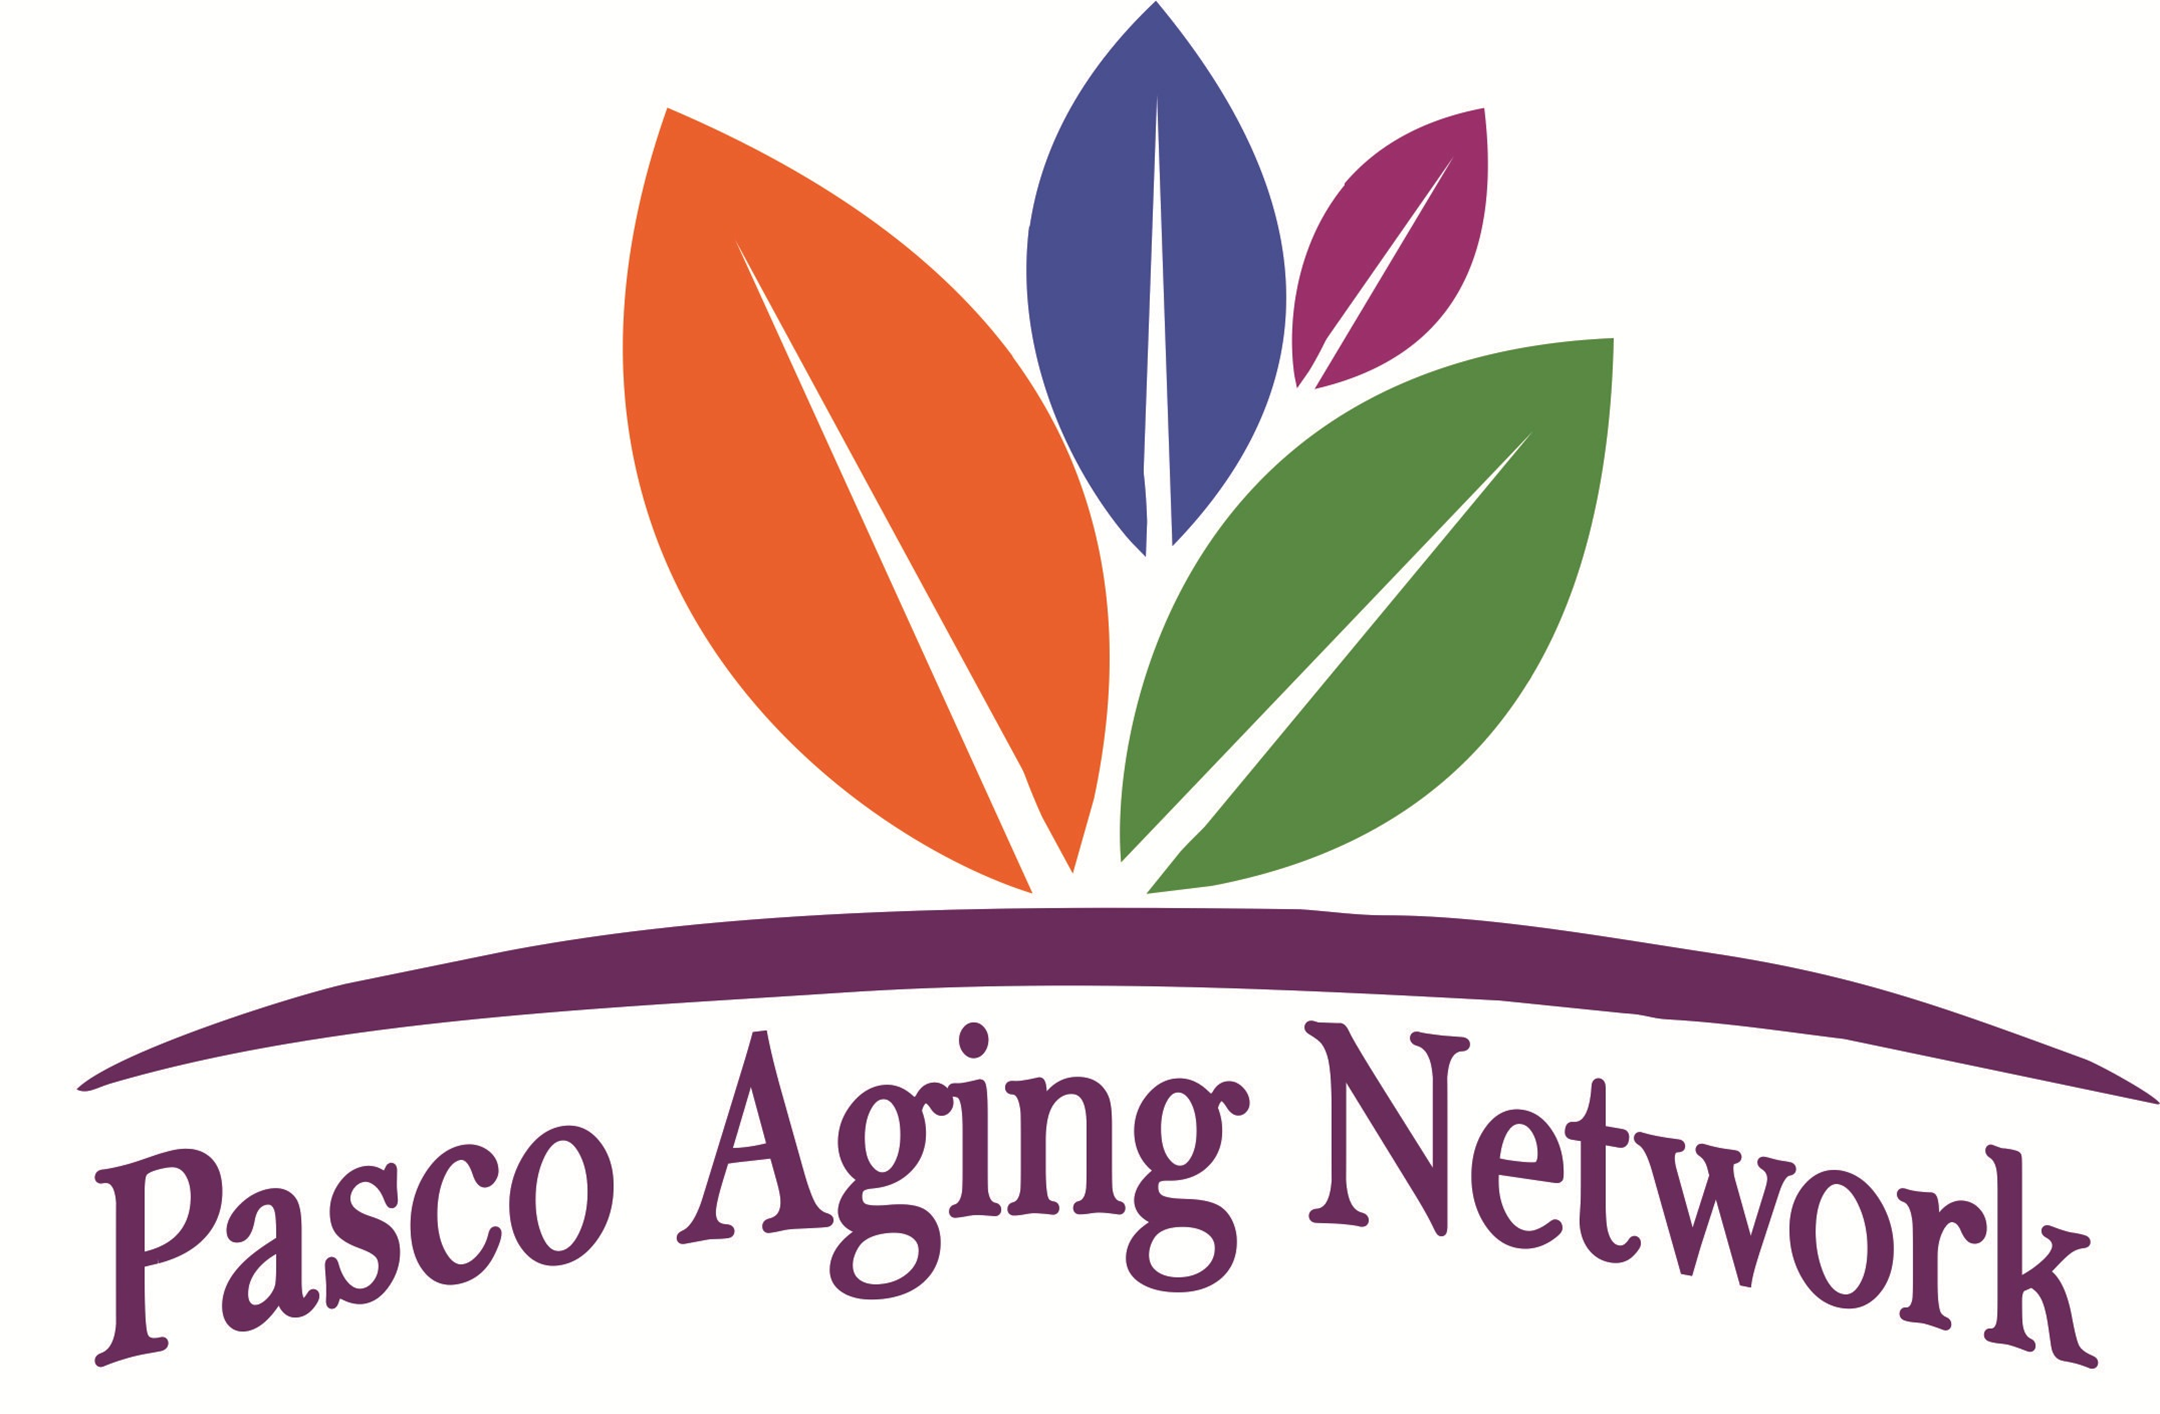 Pasco Aging Network - PAN Bylaws